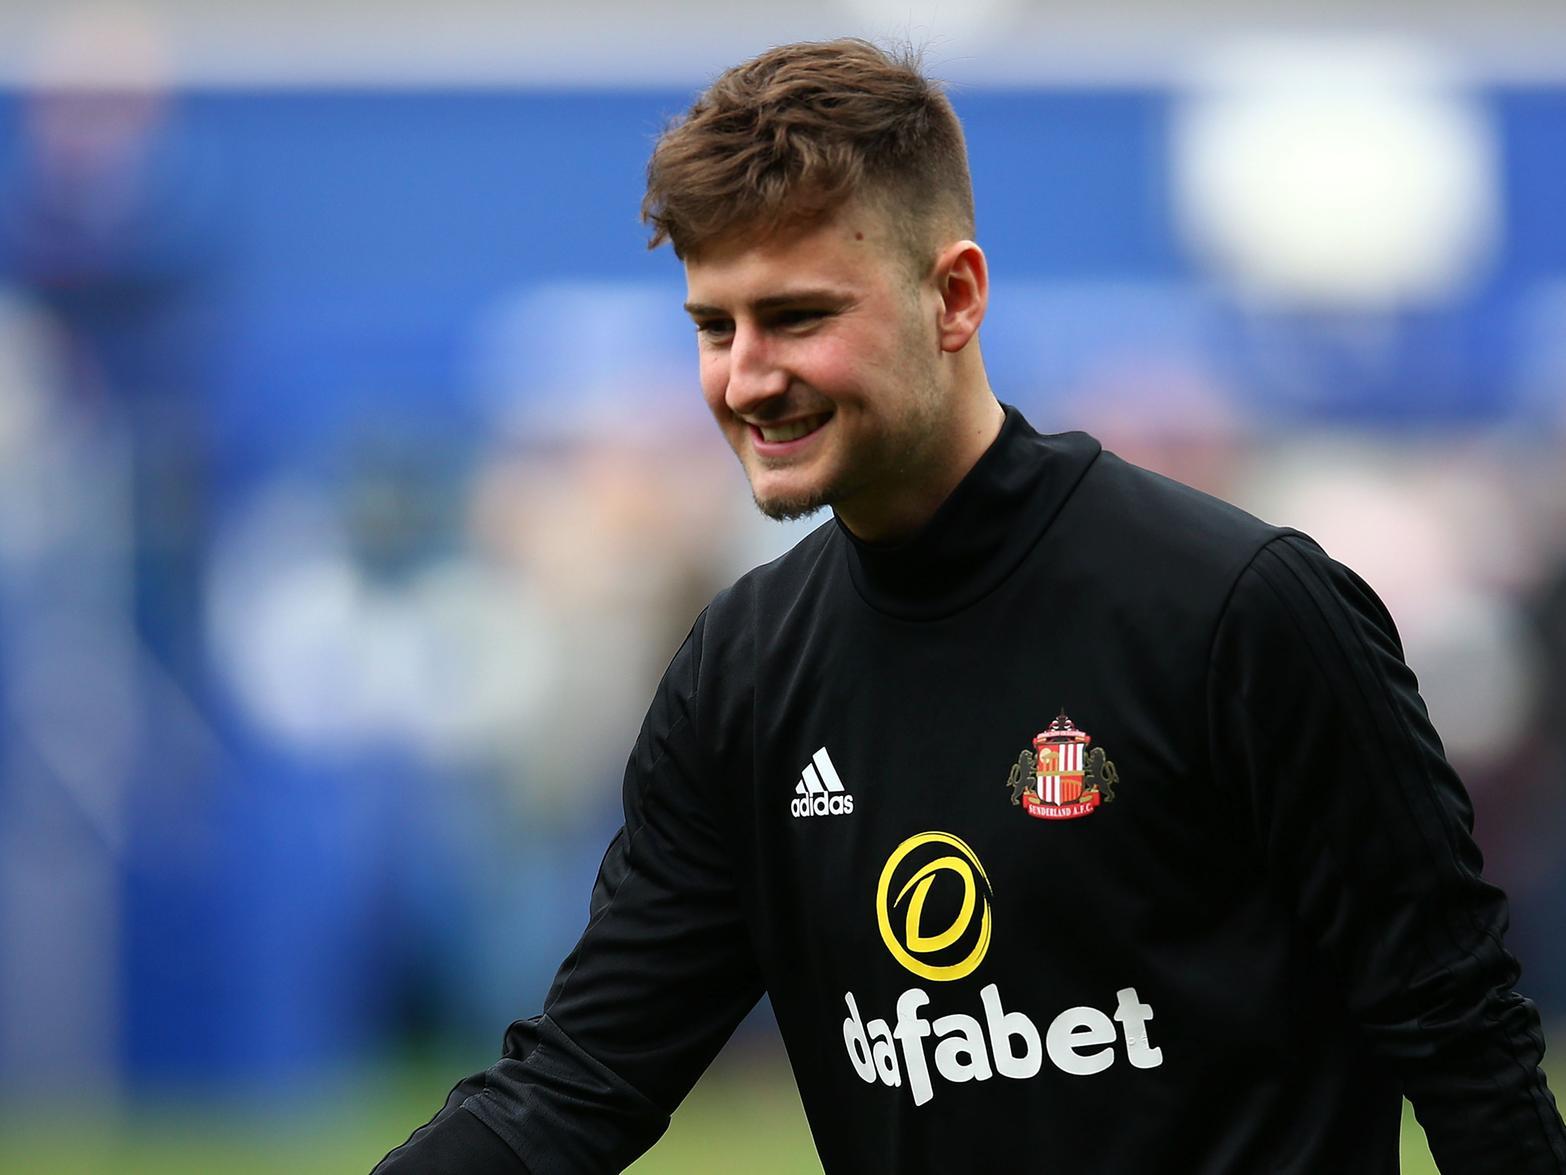 On Ethan Robson, Phil Parkinson says midfielder Ethan Robson may well leave again on loan later this week, but will only sanction it if he gets incomings. (Sunderland Echo)